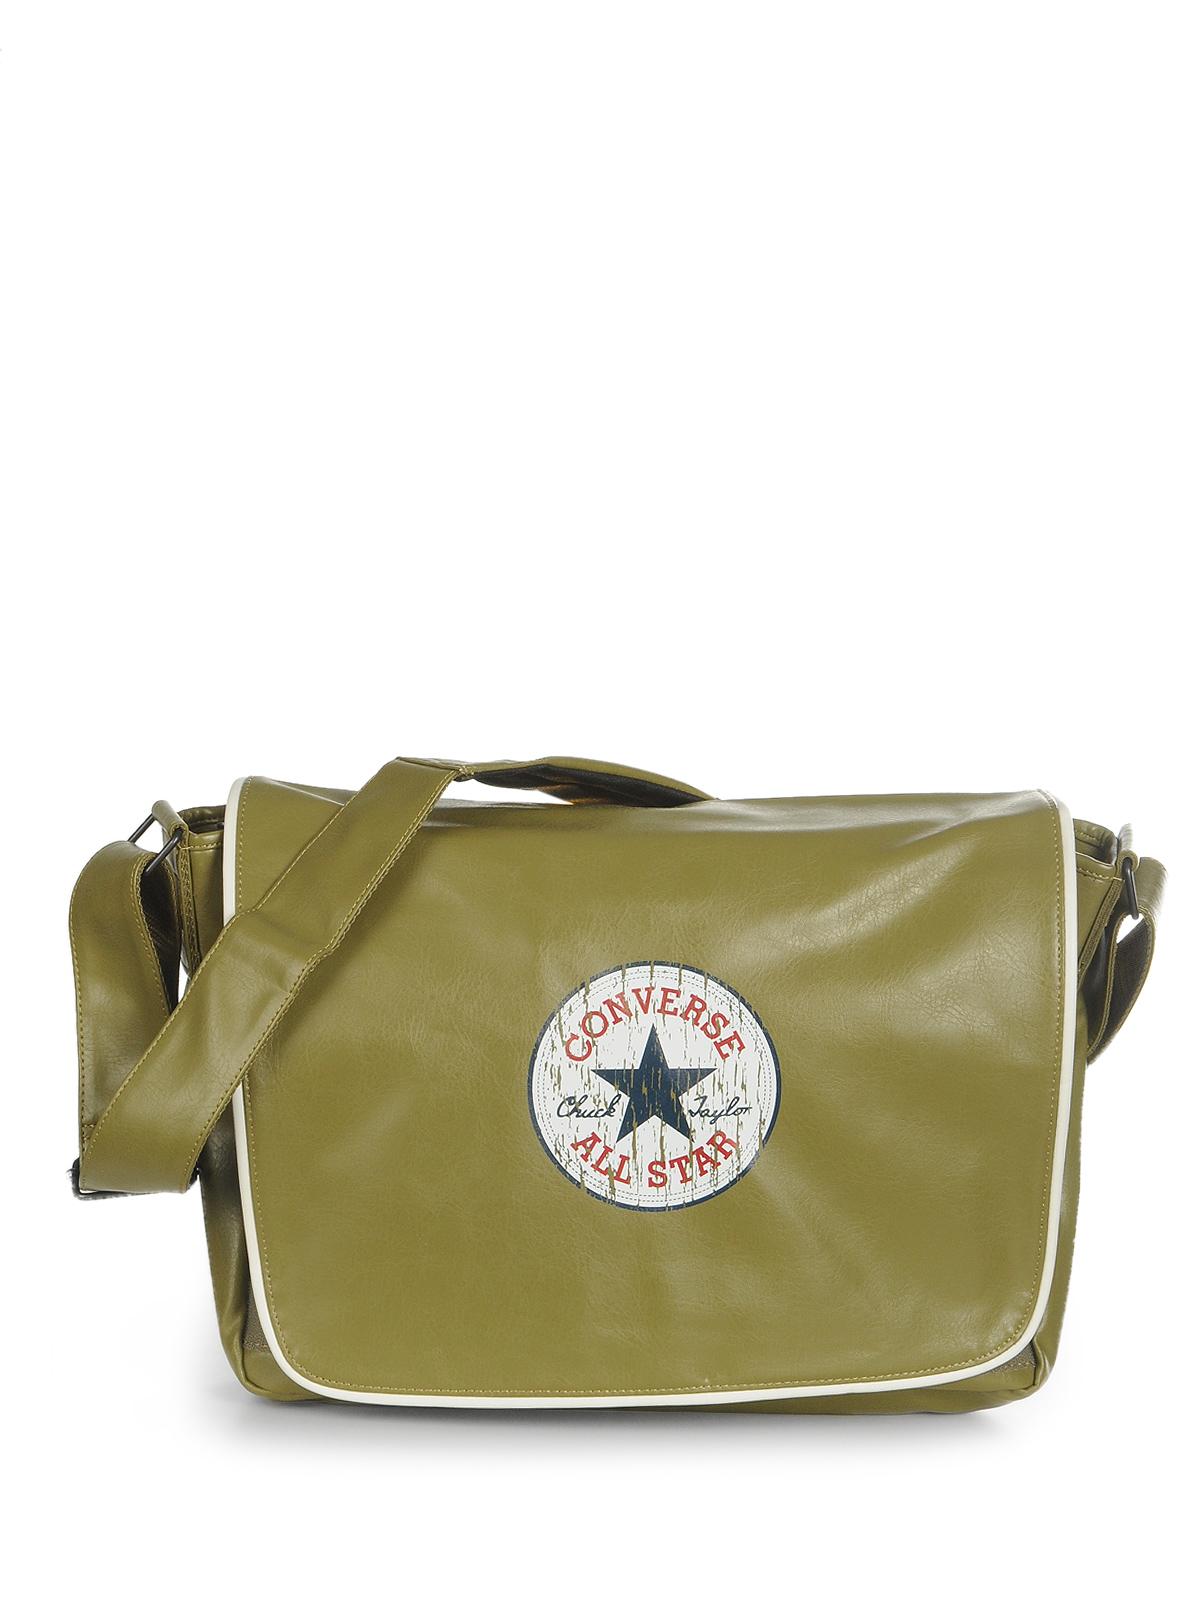 Foto Converse All Star Bolso beige ONE SIZE